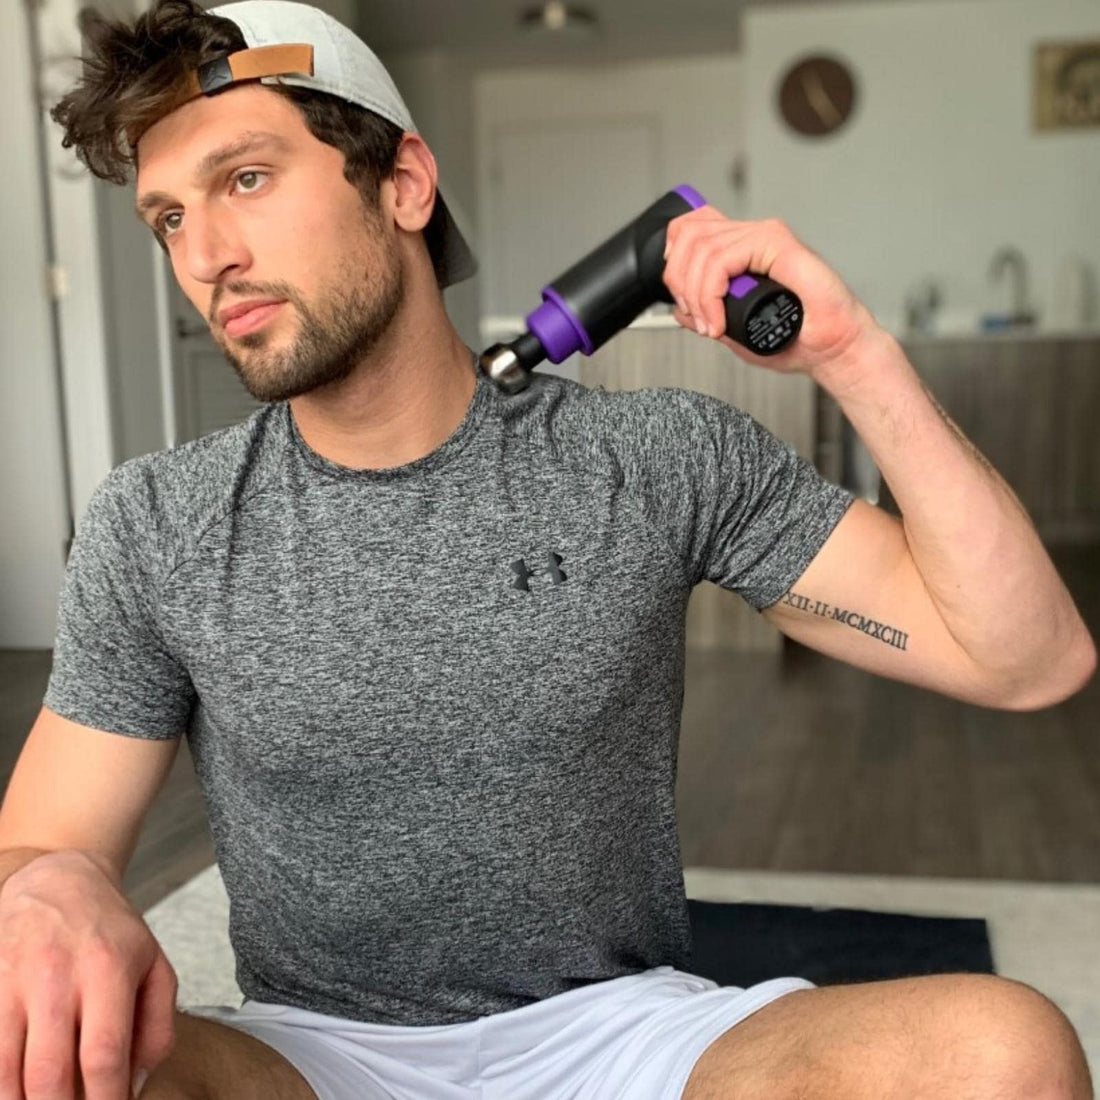 Massage gun use in the comfort of home